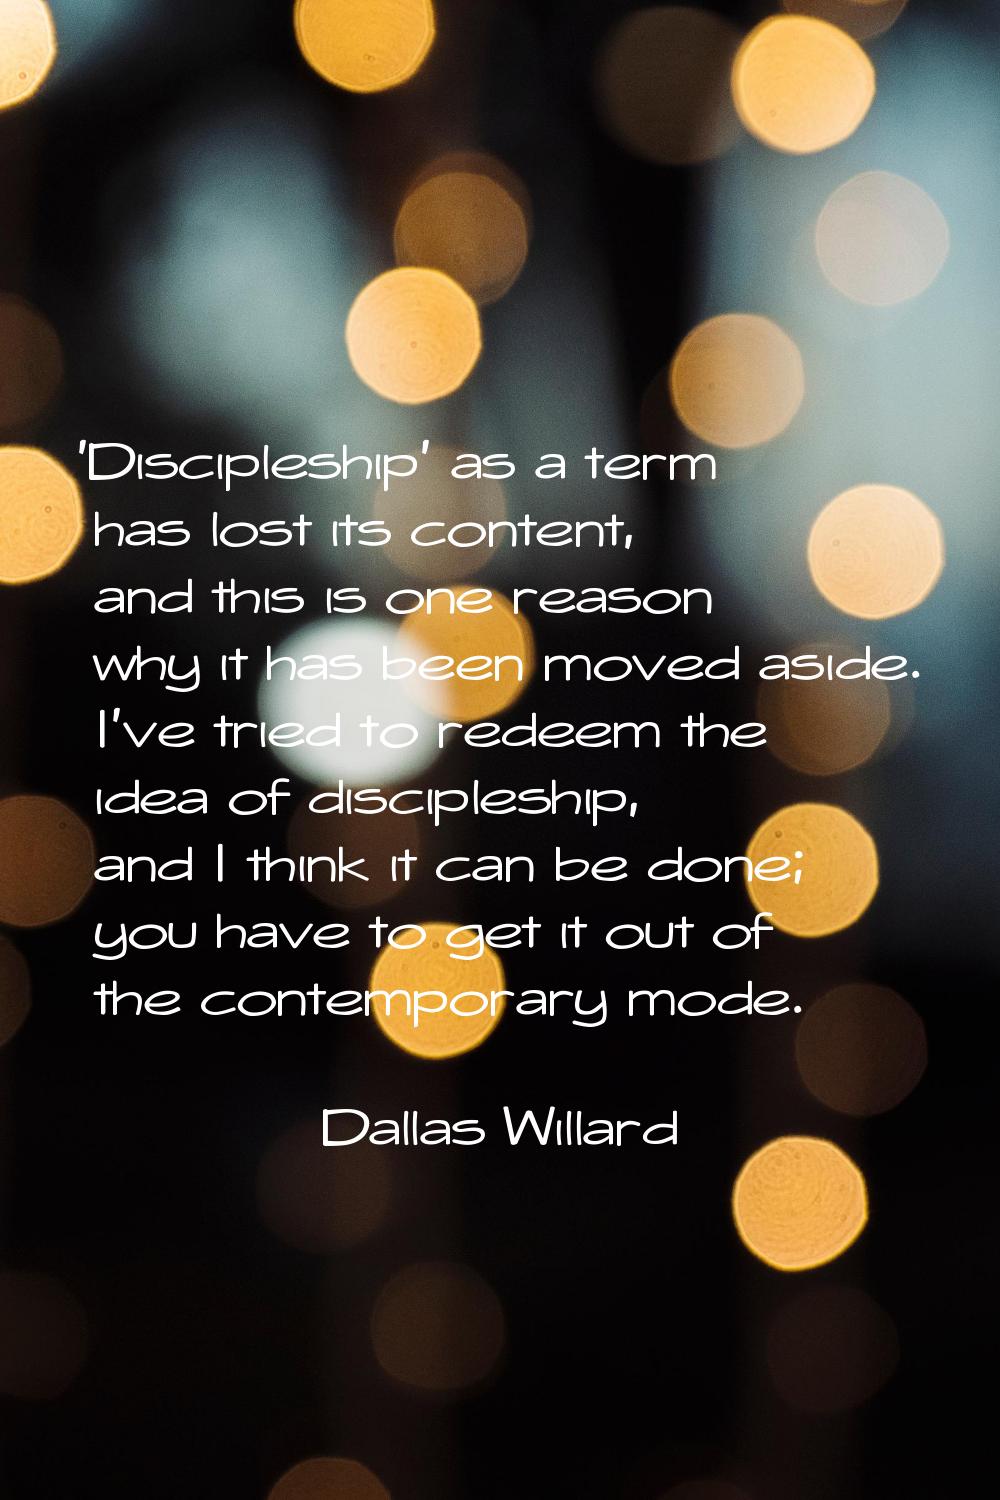 'Discipleship' as a term has lost its content, and this is one reason why it has been moved aside. 